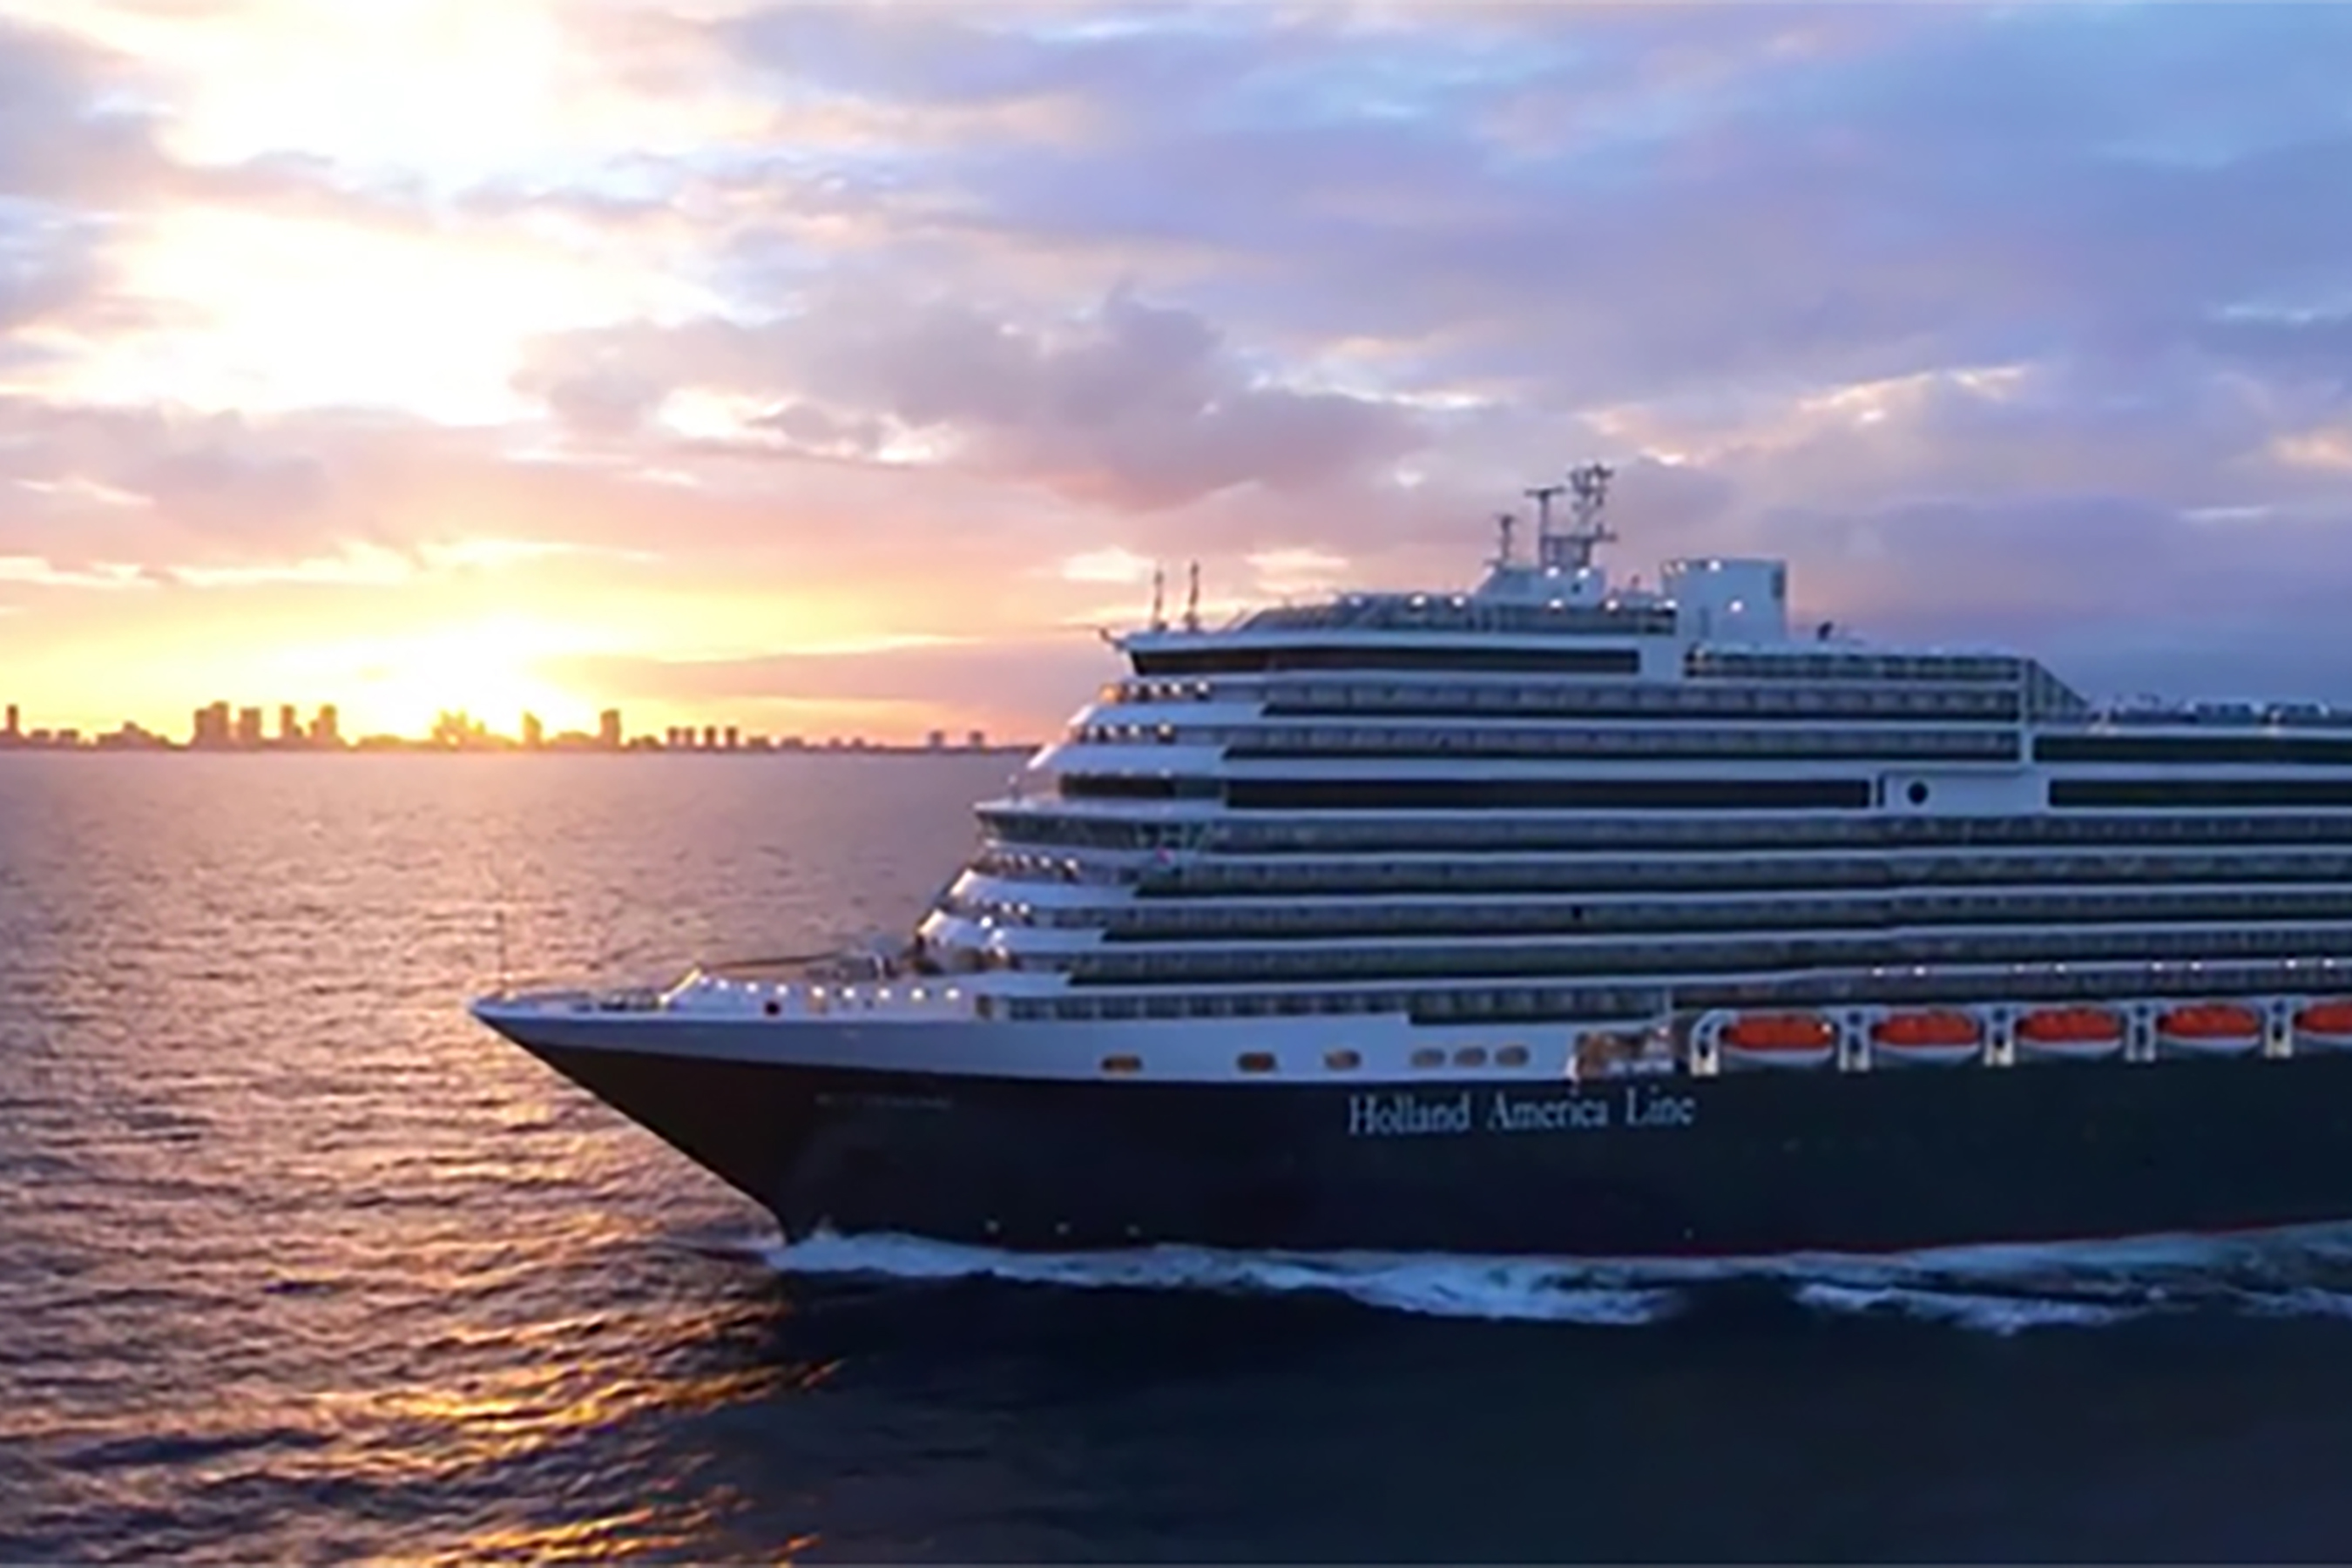 Video of Holland America Line’s newest ship, Rotterdam, as she sails in Caribbean.